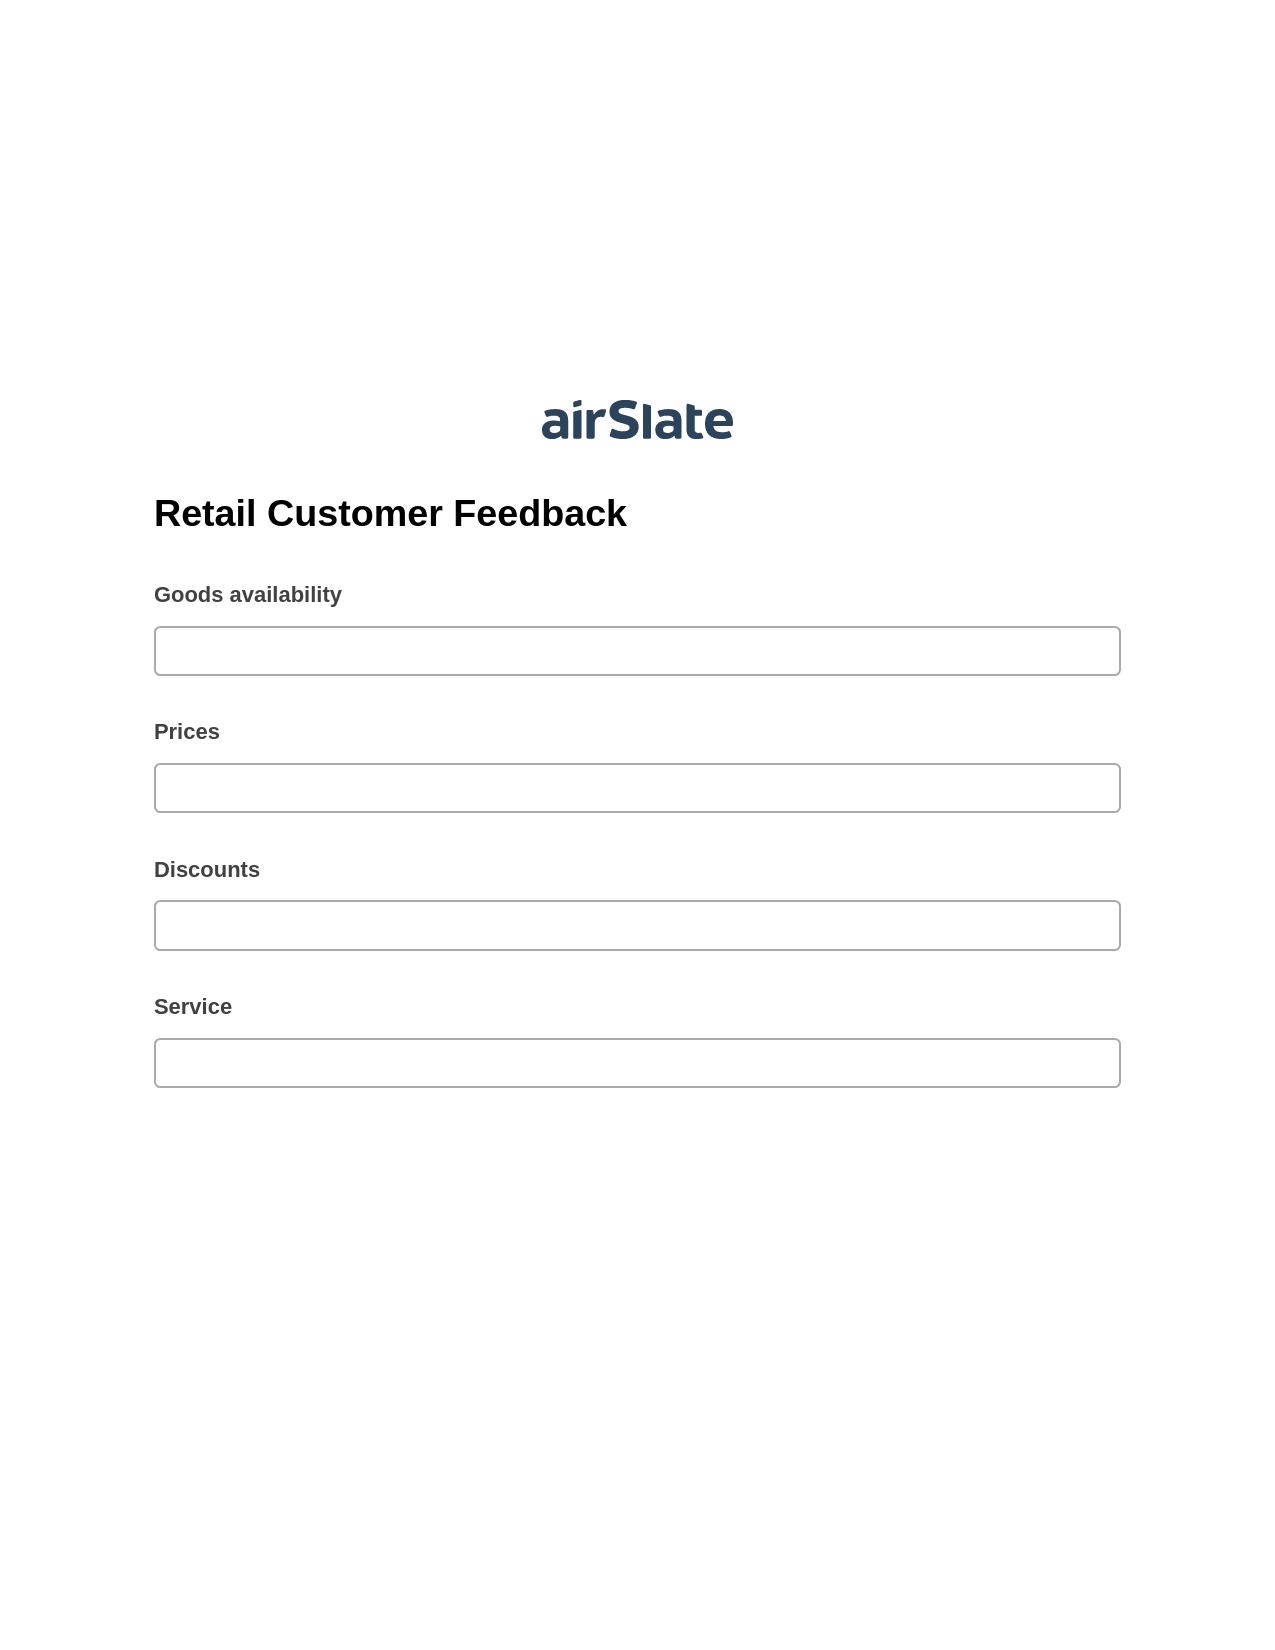 Retail Customer Feedback Pre-fill Slate from MS Dynamics 365 Records Bot, Send a Slate with Roles Bot, Export to Excel 365 Bot